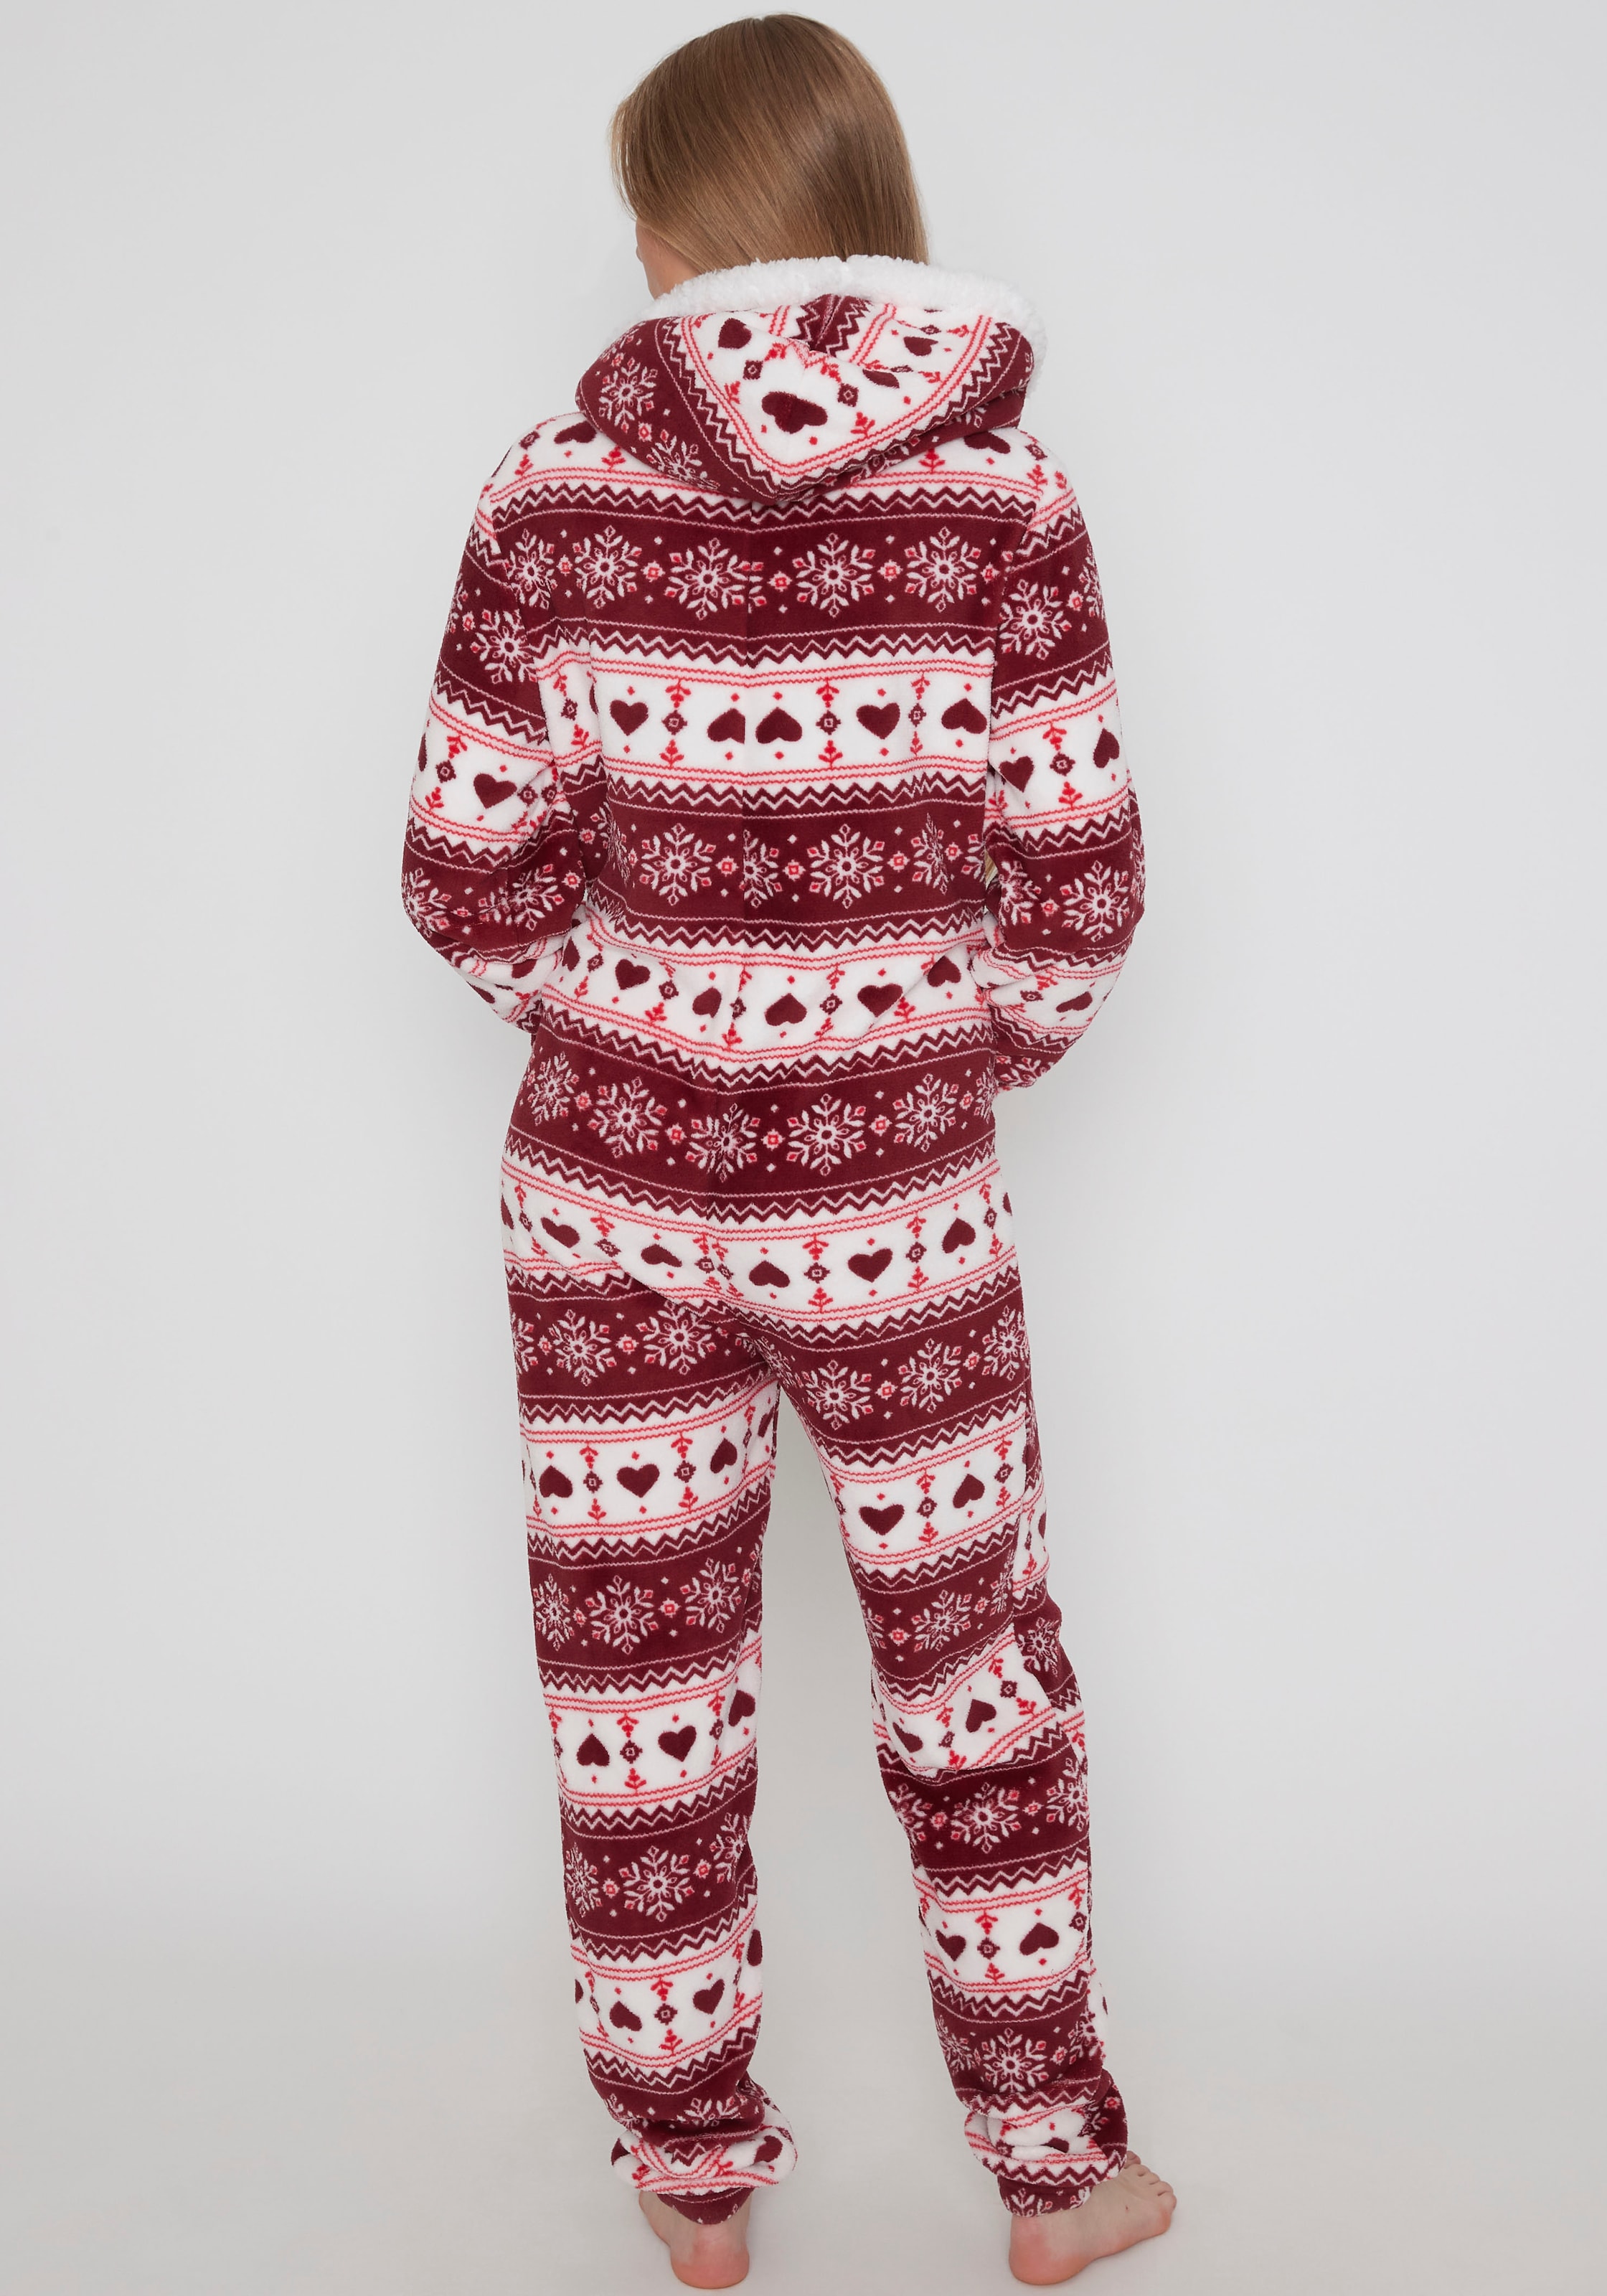 HaILY\'S Overall »LG P RP Me44lly«, im ugly christmas look bestellen | BAUR